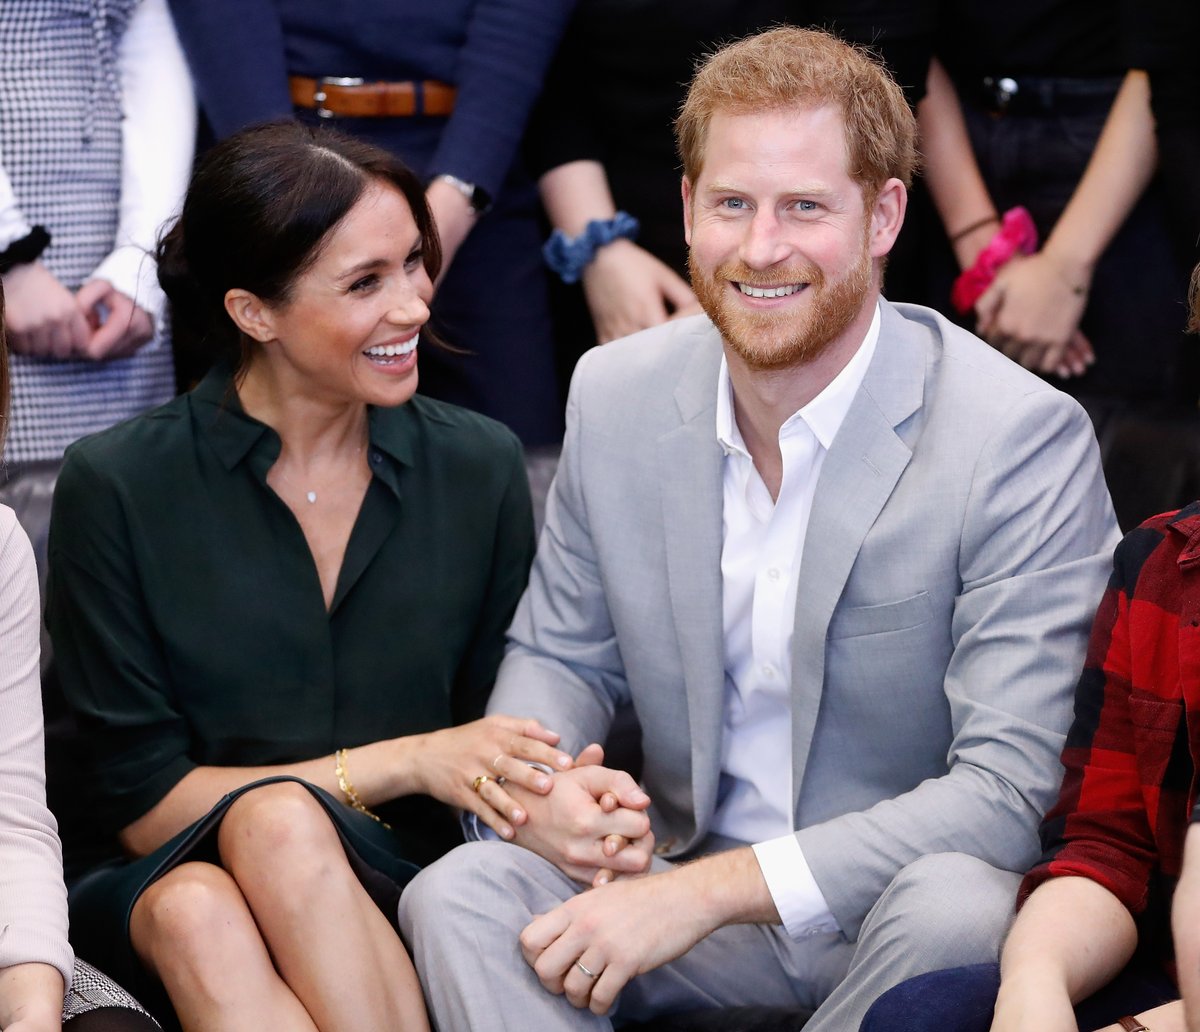 Entertainment News Round-up: Ugandan leader sneakers, Le Carre's heads to TV, Meghan and Harry in Australia